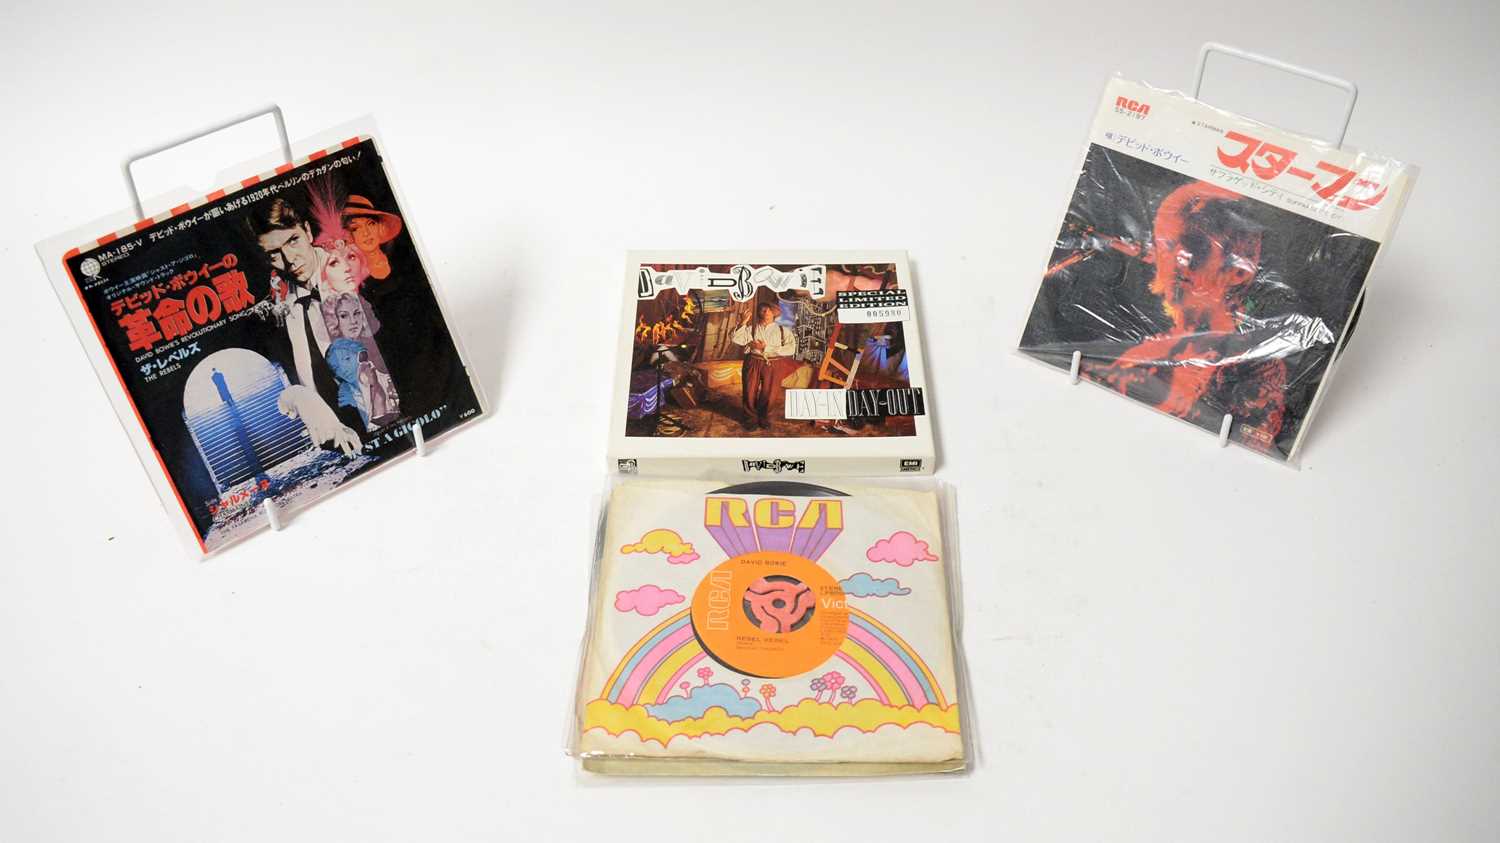 Lot 306 - 8 David Bowie 7" singles, EPs, foreign imports, and box set